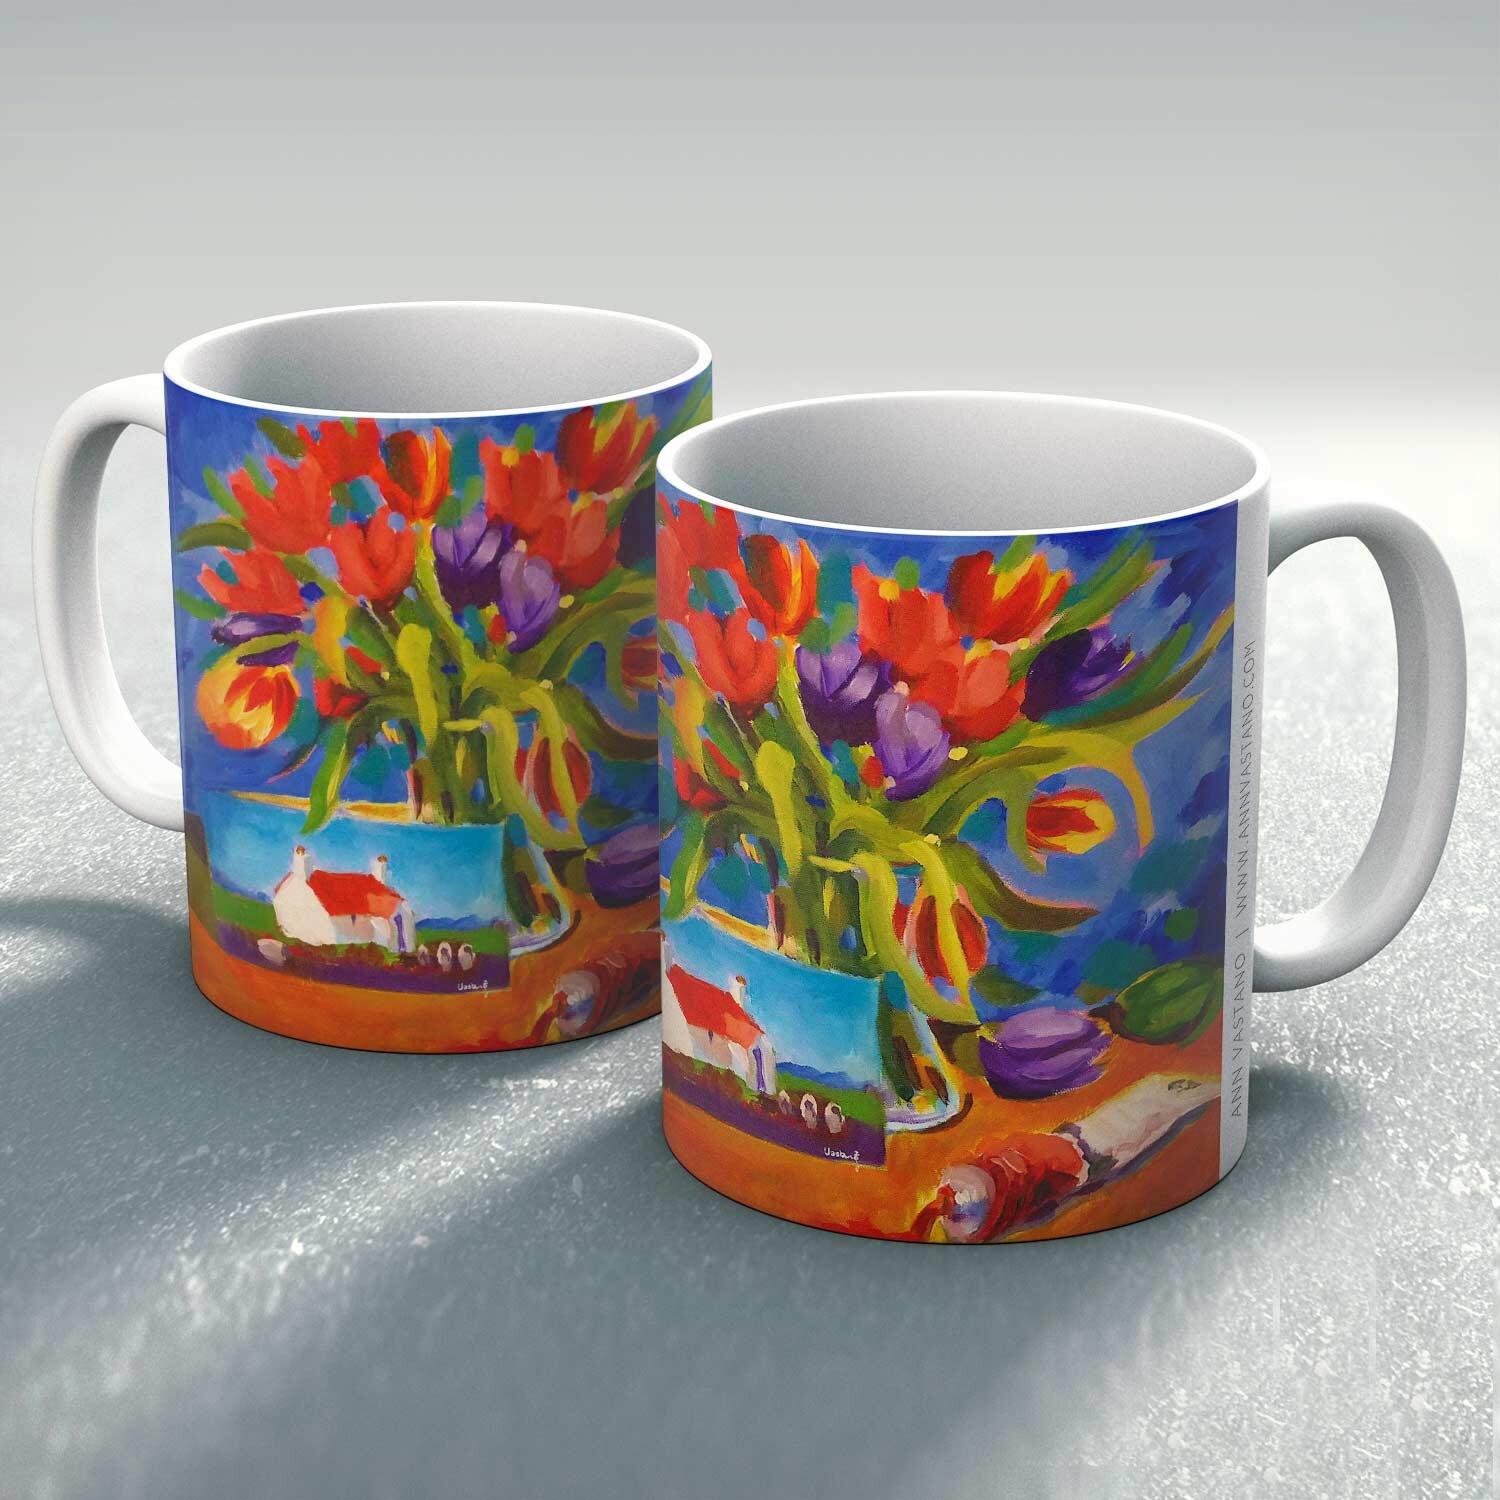 A Pause for Thought Ceramic Mug by Ann Vastano